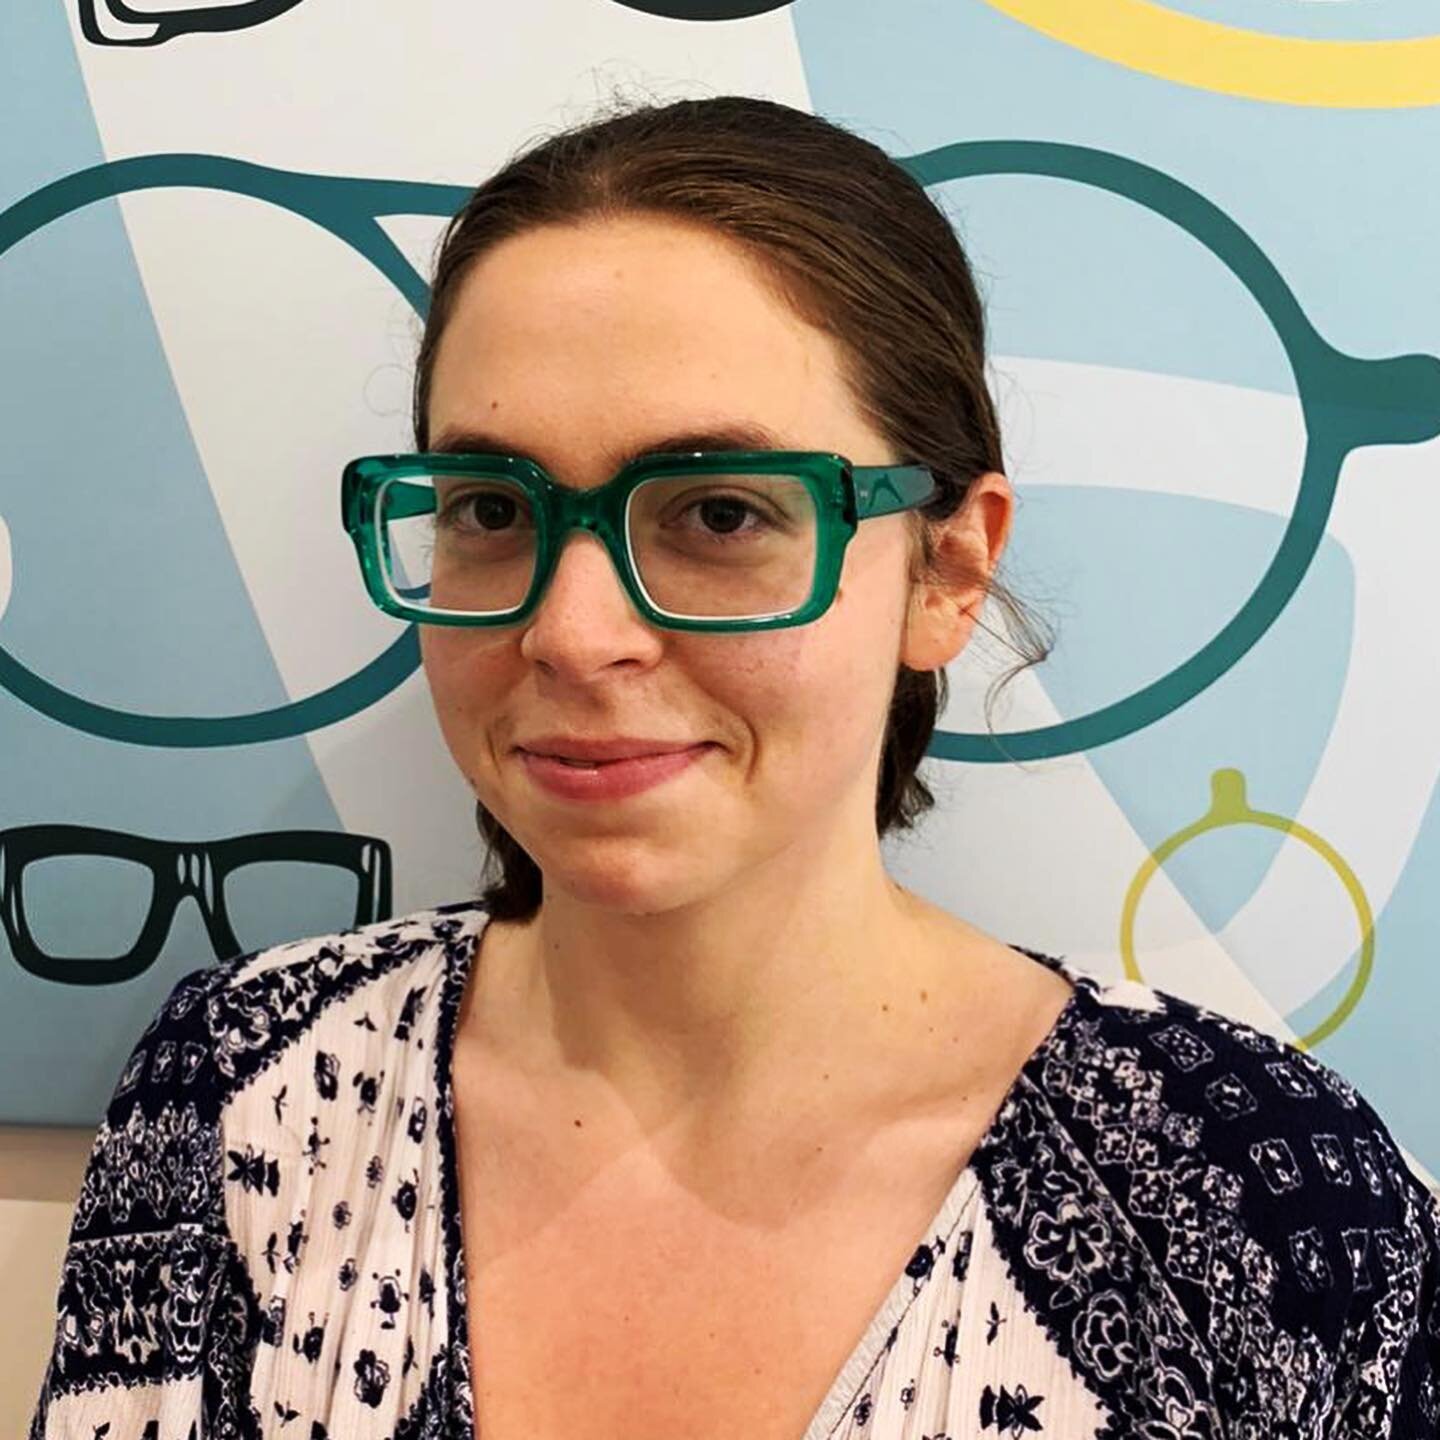 Maria had everyone green with envy when she came to collect these absolutely gorgeous new @kirkandkirk specs. 

The frame - Percy - has a cool, retro edge and sits perfectly on Maria&rsquo;s face shape.

Fancy freshening up your wardrobe with a pop o